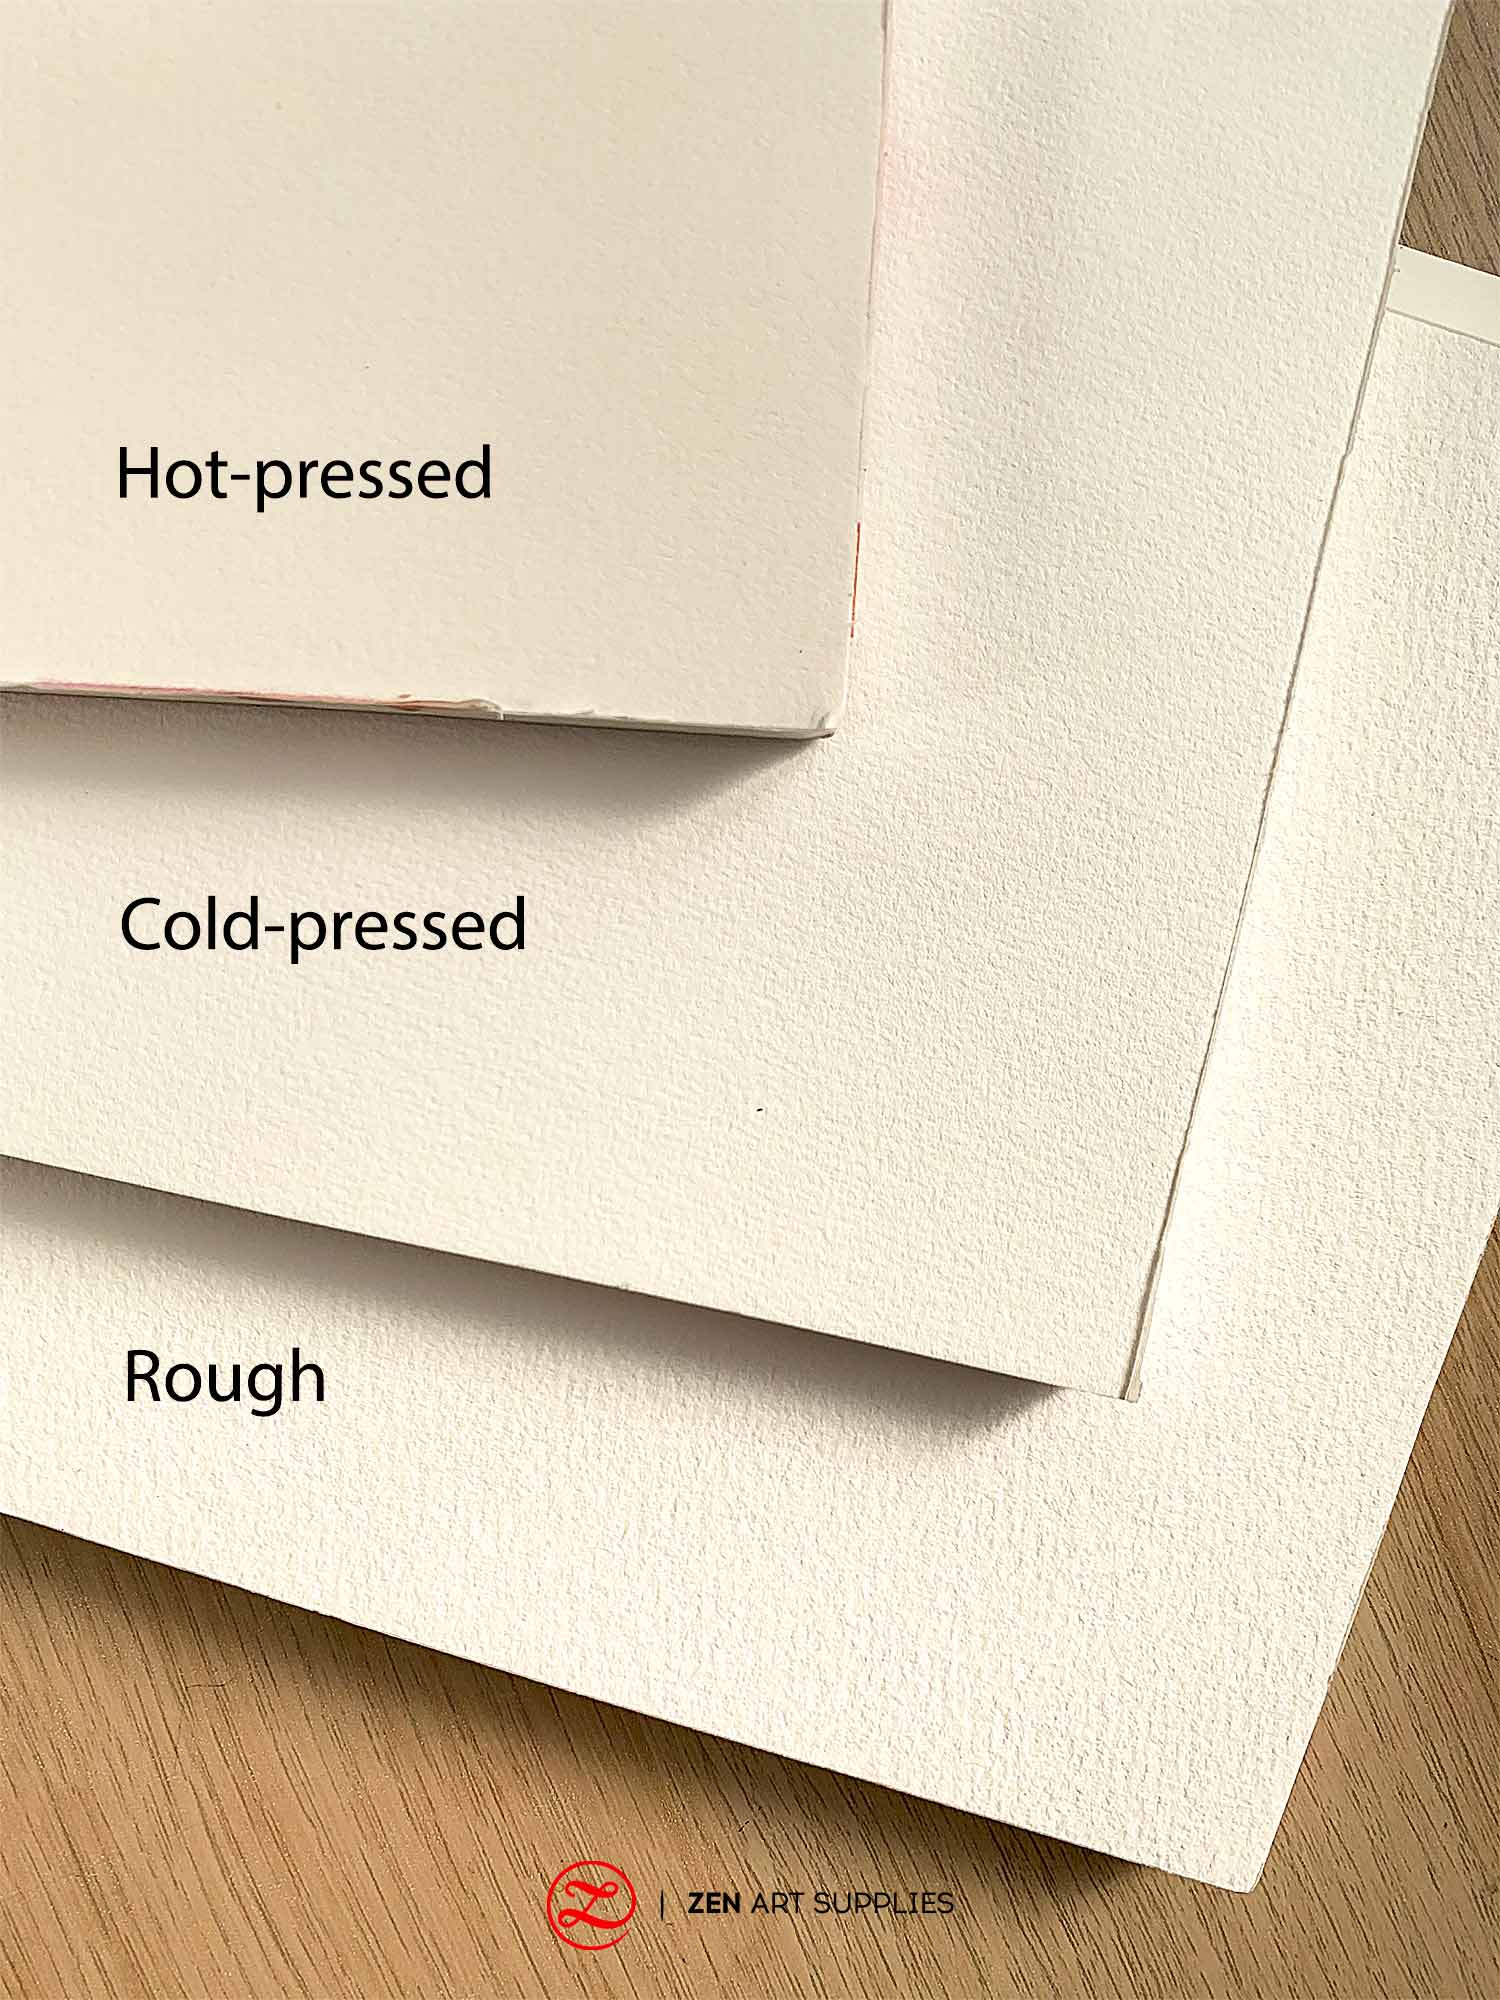 Hot pressed, cold pressed, and rough watercolor paper.